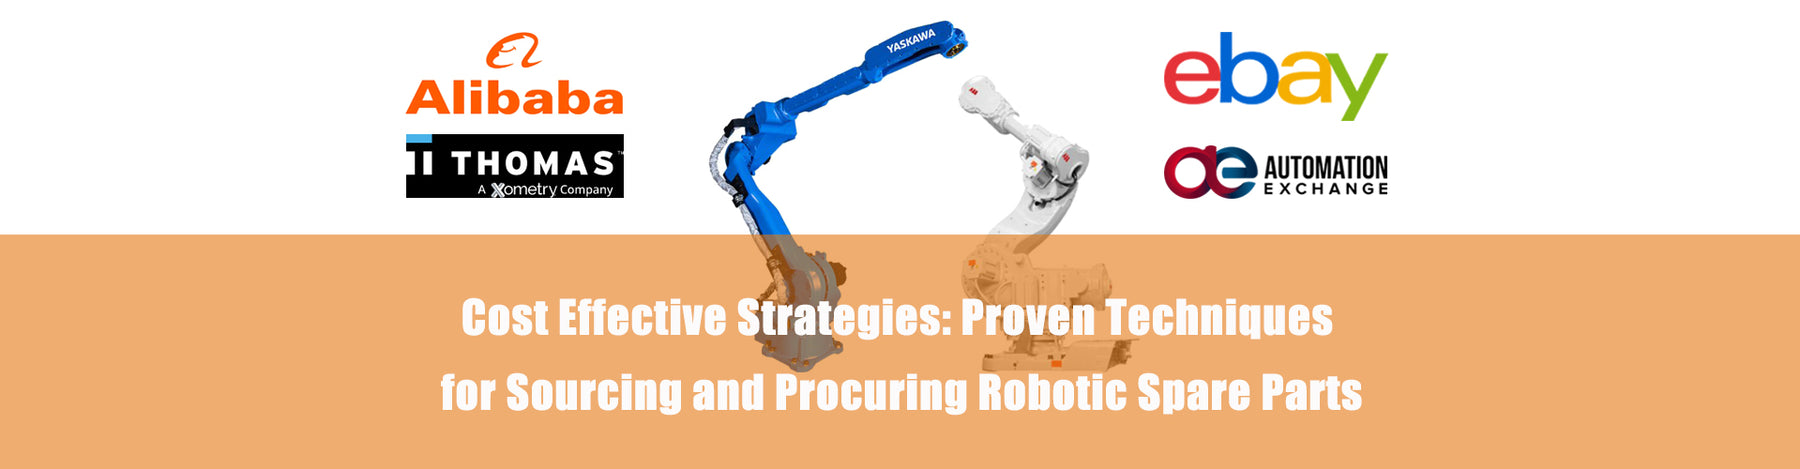 Cost Effective Strategies: Proven Techniques for Sourcing and Procuring Robotic Spare Parts